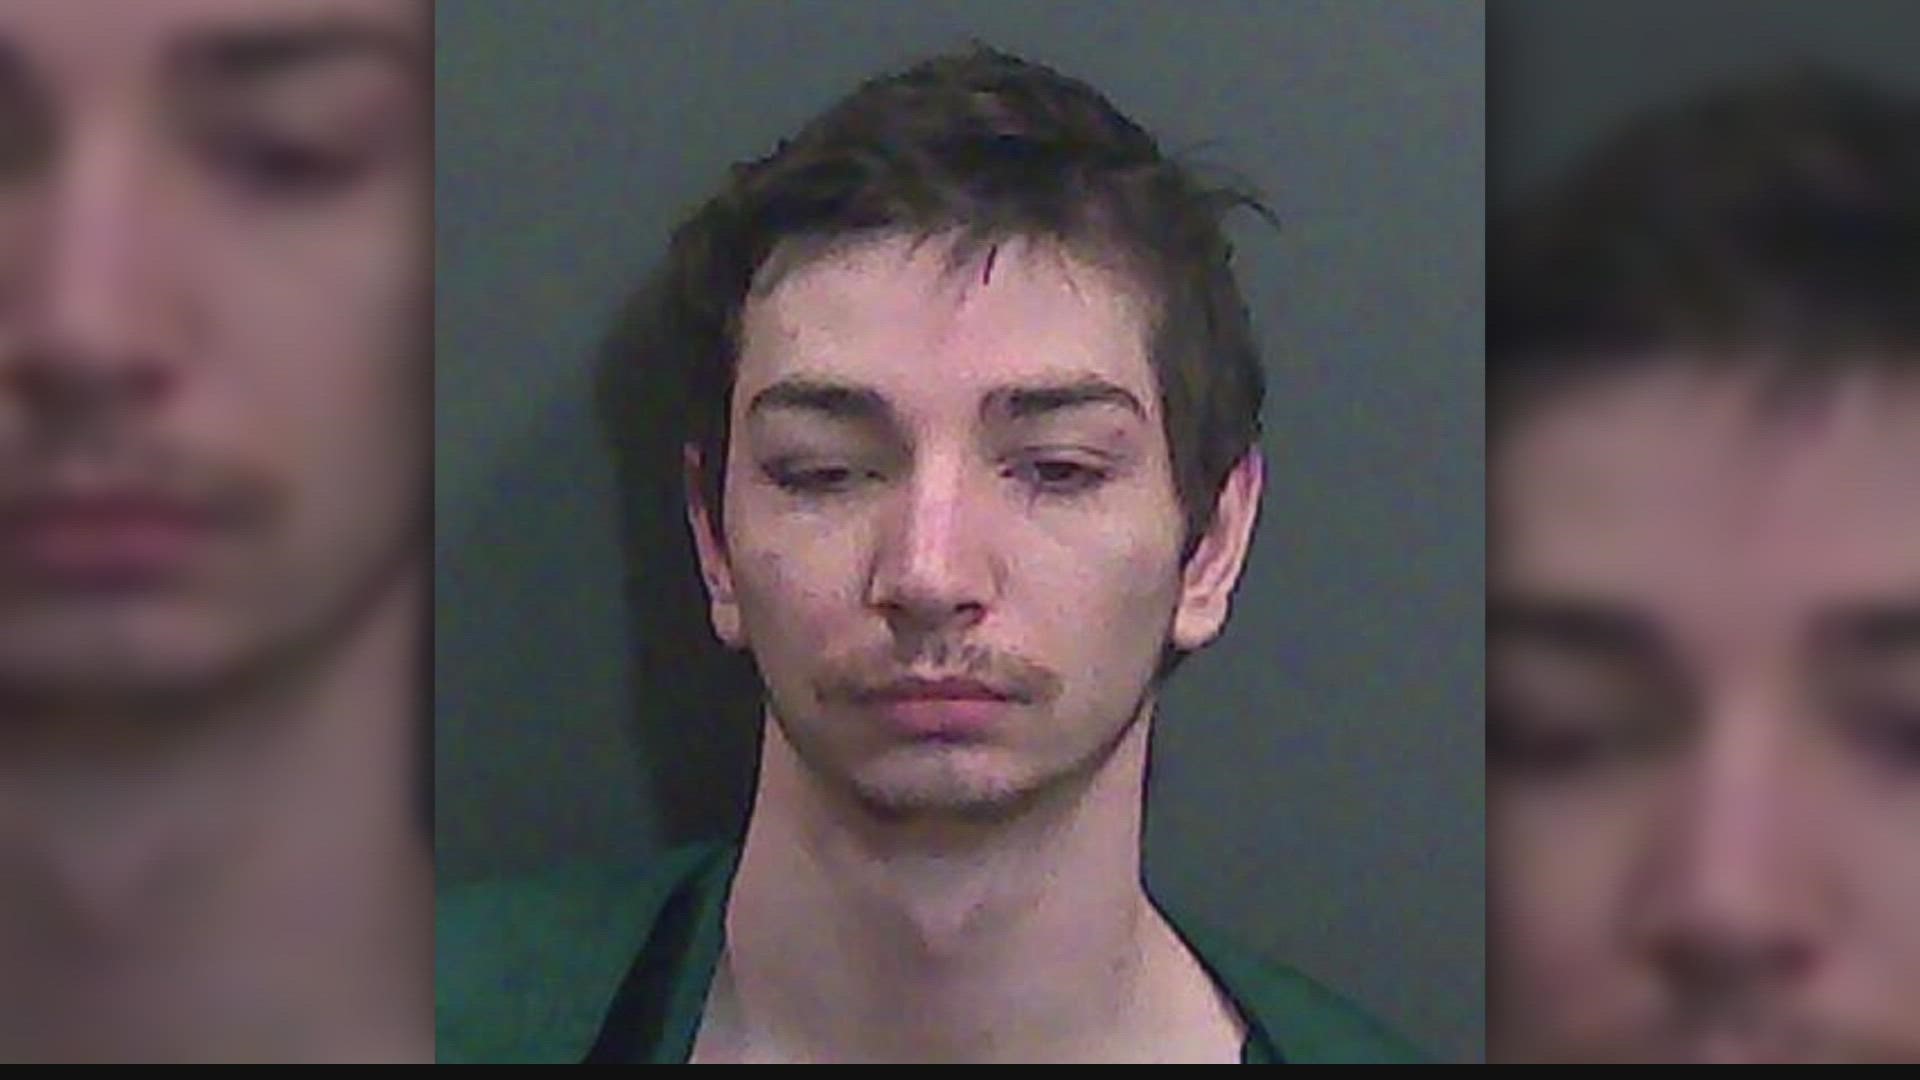 Nicholas Haneline, 20, is held on charges of robbery while armed with a deadly weapon, intimidation, resisting law enforcement and striking a law enforcement animal.